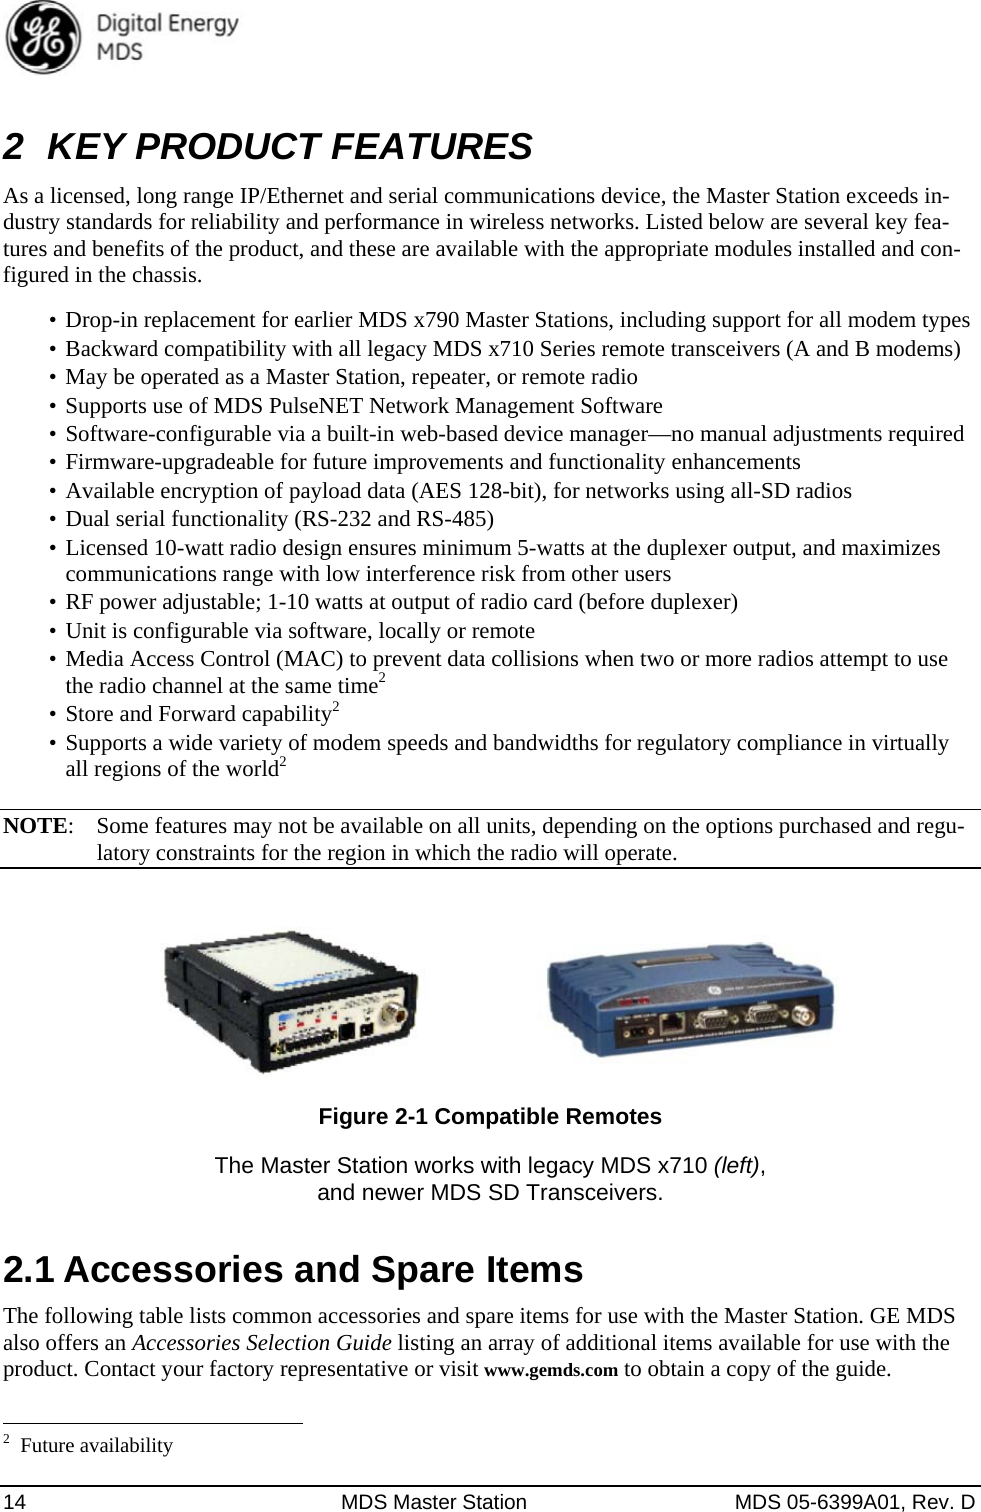  14  MDS Master Station  MDS 05-6399A01, Rev. D 2  KEY PRODUCT FEATURES As a licensed, long range IP/Ethernet and serial communications device, the Master Station exceeds in-dustry standards for reliability and performance in wireless networks. Listed below are several key fea-tures and benefits of the product, and these are available with the appropriate modules installed and con-figured in the chassis. •  Drop-in replacement for earlier MDS x790 Master Stations, including support for all modem types •  Backward compatibility with all legacy MDS x710 Series remote transceivers (A and B modems) •  May be operated as a Master Station, repeater, or remote radio •  Supports use of MDS PulseNET Network Management Software •  Software-configurable via a built-in web-based device manager—no manual adjustments required •  Firmware-upgradeable for future improvements and functionality enhancements •  Available encryption of payload data (AES 128-bit), for networks using all-SD radios •  Dual serial functionality (RS-232 and RS-485) •  Licensed 10-watt radio design ensures minimum 5-watts at the duplexer output, and maximizes communications range with low interference risk from other users •  RF power adjustable; 1-10 watts at output of radio card (before duplexer) •  Unit is configurable via software, locally or remote •  Media Access Control (MAC) to prevent data collisions when two or more radios attempt to use the radio channel at the same time2 •  Store and Forward capability2 •  Supports a wide variety of modem speeds and bandwidths for regulatory compliance in virtually all regions of the world2  NOTE:  Some features may not be available on all units, depending on the options purchased and regu-latory constraints for the region in which the radio will operate.   Figure 2-1 Compatible Remotes The Master Station works with legacy MDS x710 (left),  and newer MDS SD Transceivers. 2.1 Accessories and Spare Items   The following table lists common accessories and spare items for use with the Master Station. GE MDS also offers an Accessories Selection Guide listing an array of additional items available for use with the product. Contact your factory representative or visit www.gemds.com to obtain a copy of the guide.                                                       2 Future availability 